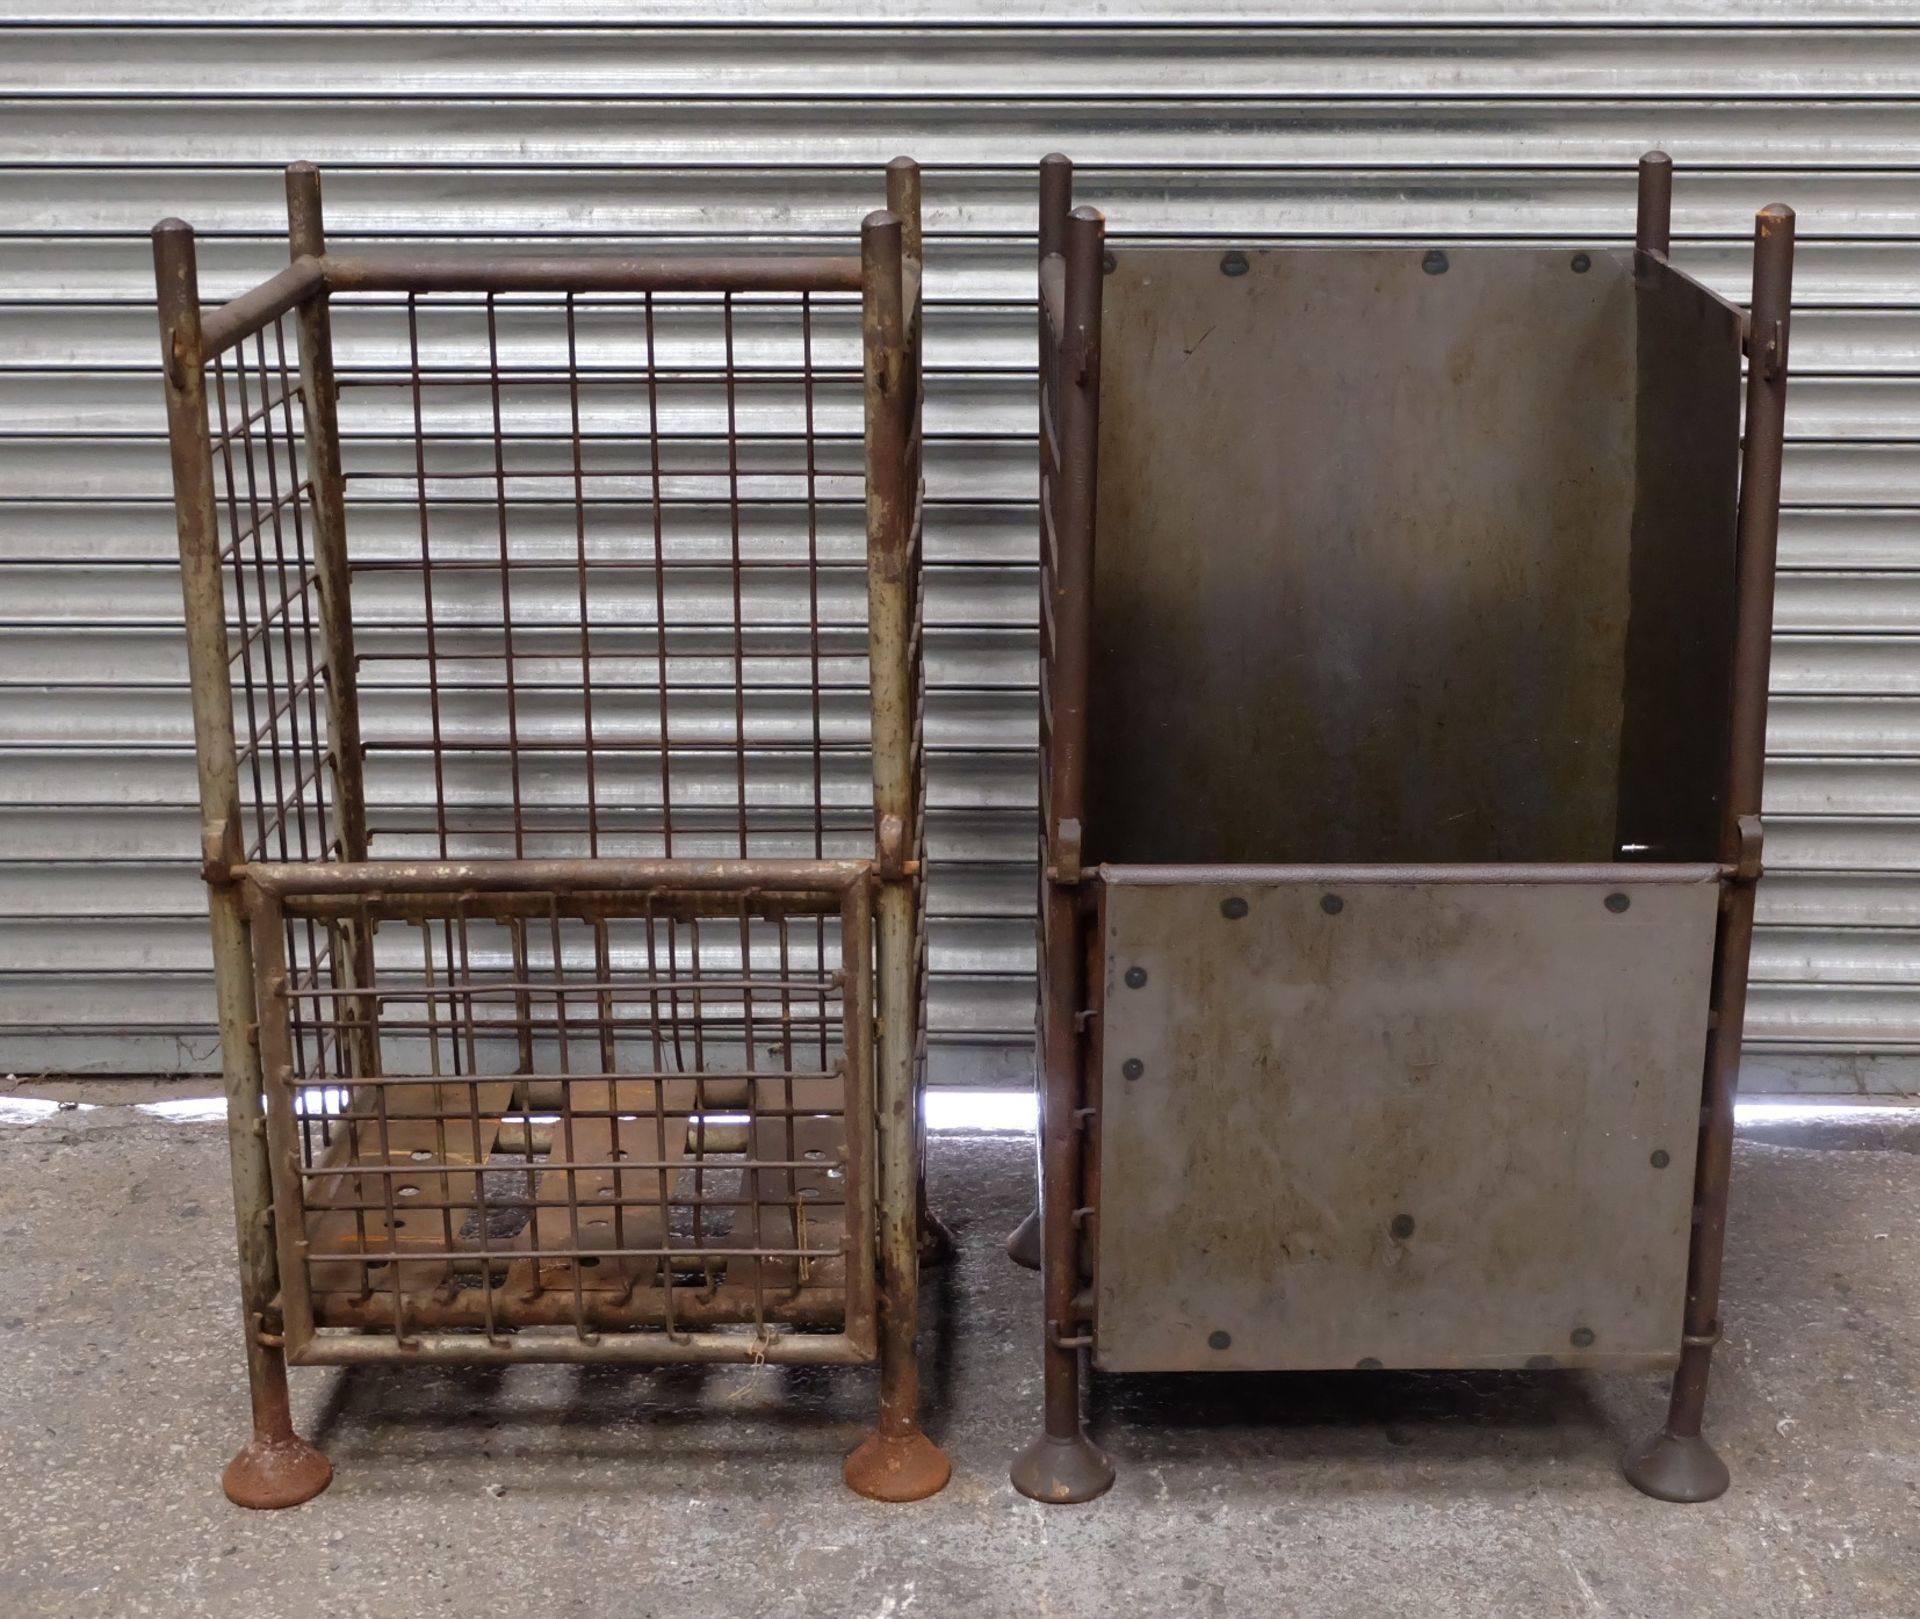 2 Steel Stillages, 21in x 25in x 48in h, 35in inte - Image 4 of 6